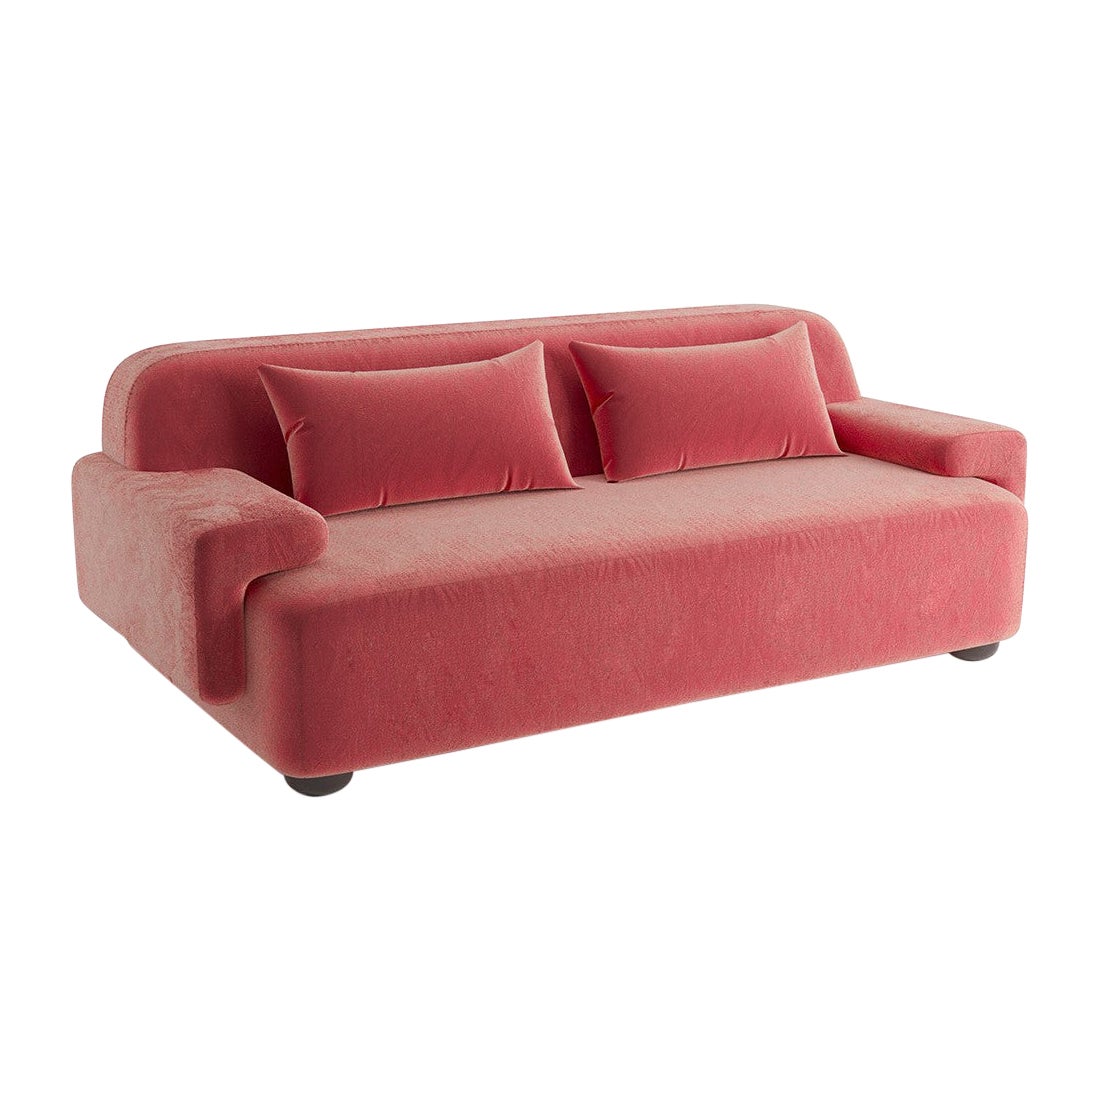 Popus Editions Lena 3 Seater Sofa in Pink Como Velvet Upholstery